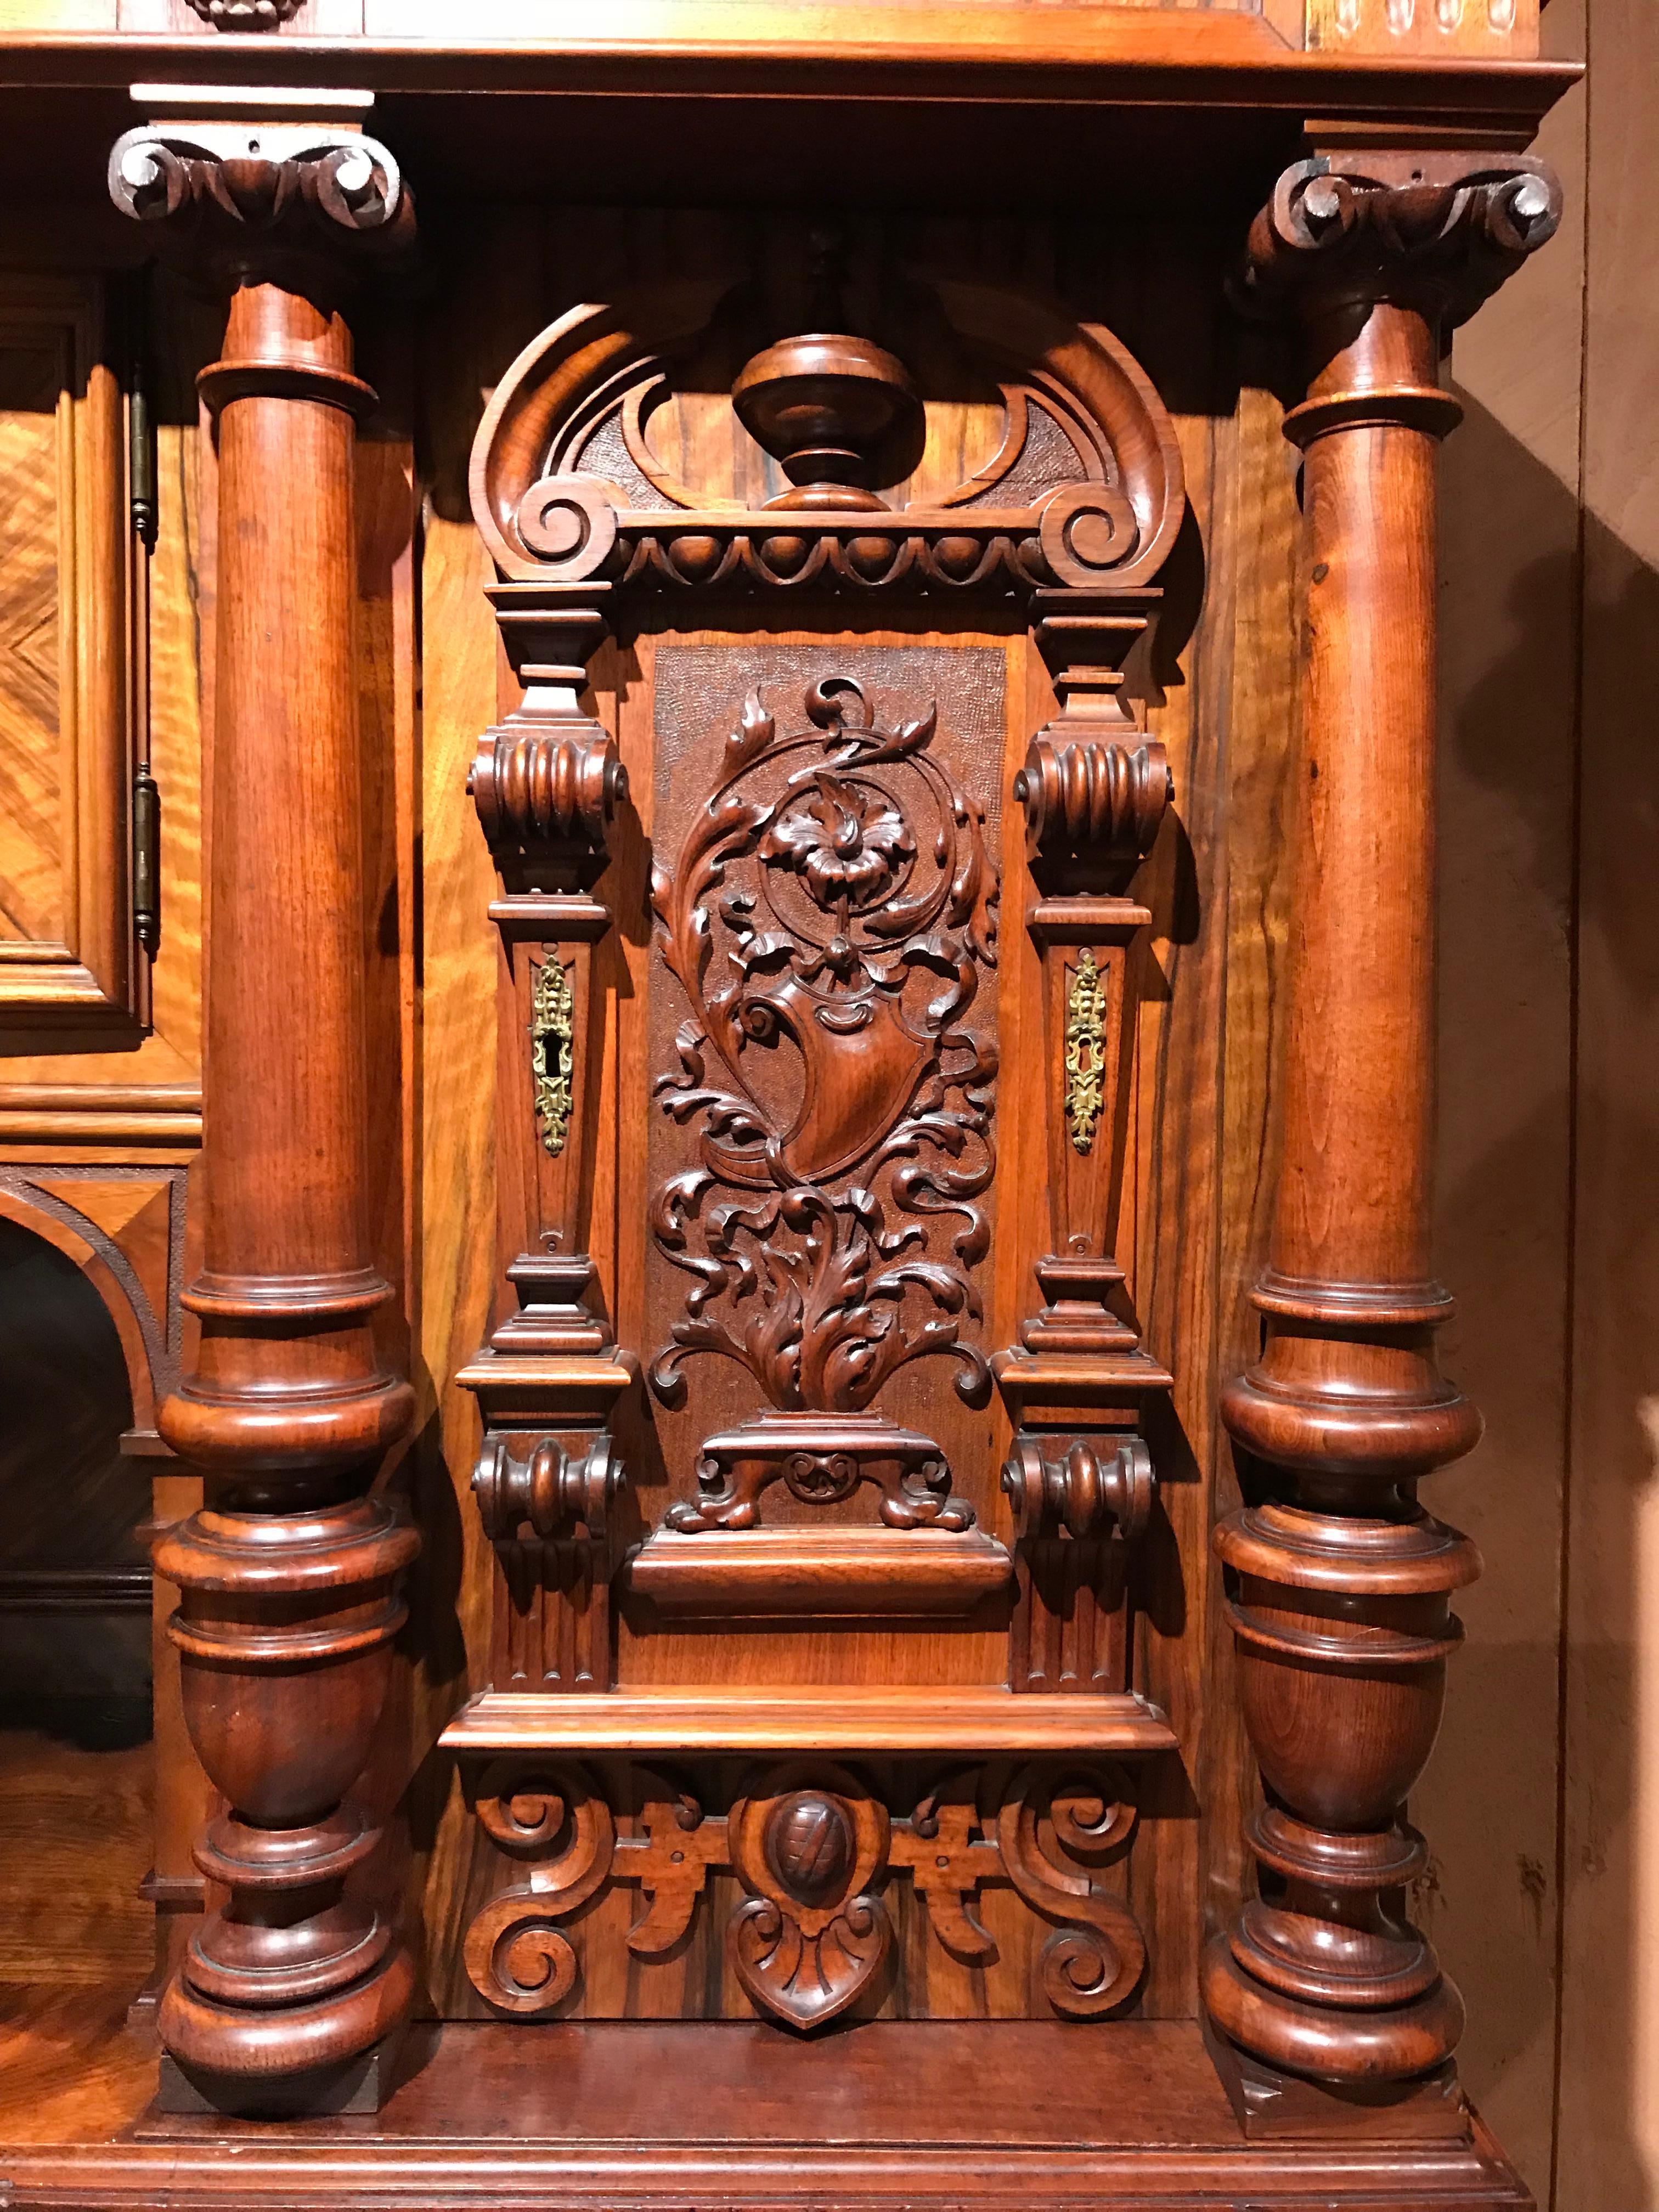 19th Century German Walnut Schrank or Cabinet with Boldly Carved Panel Doors